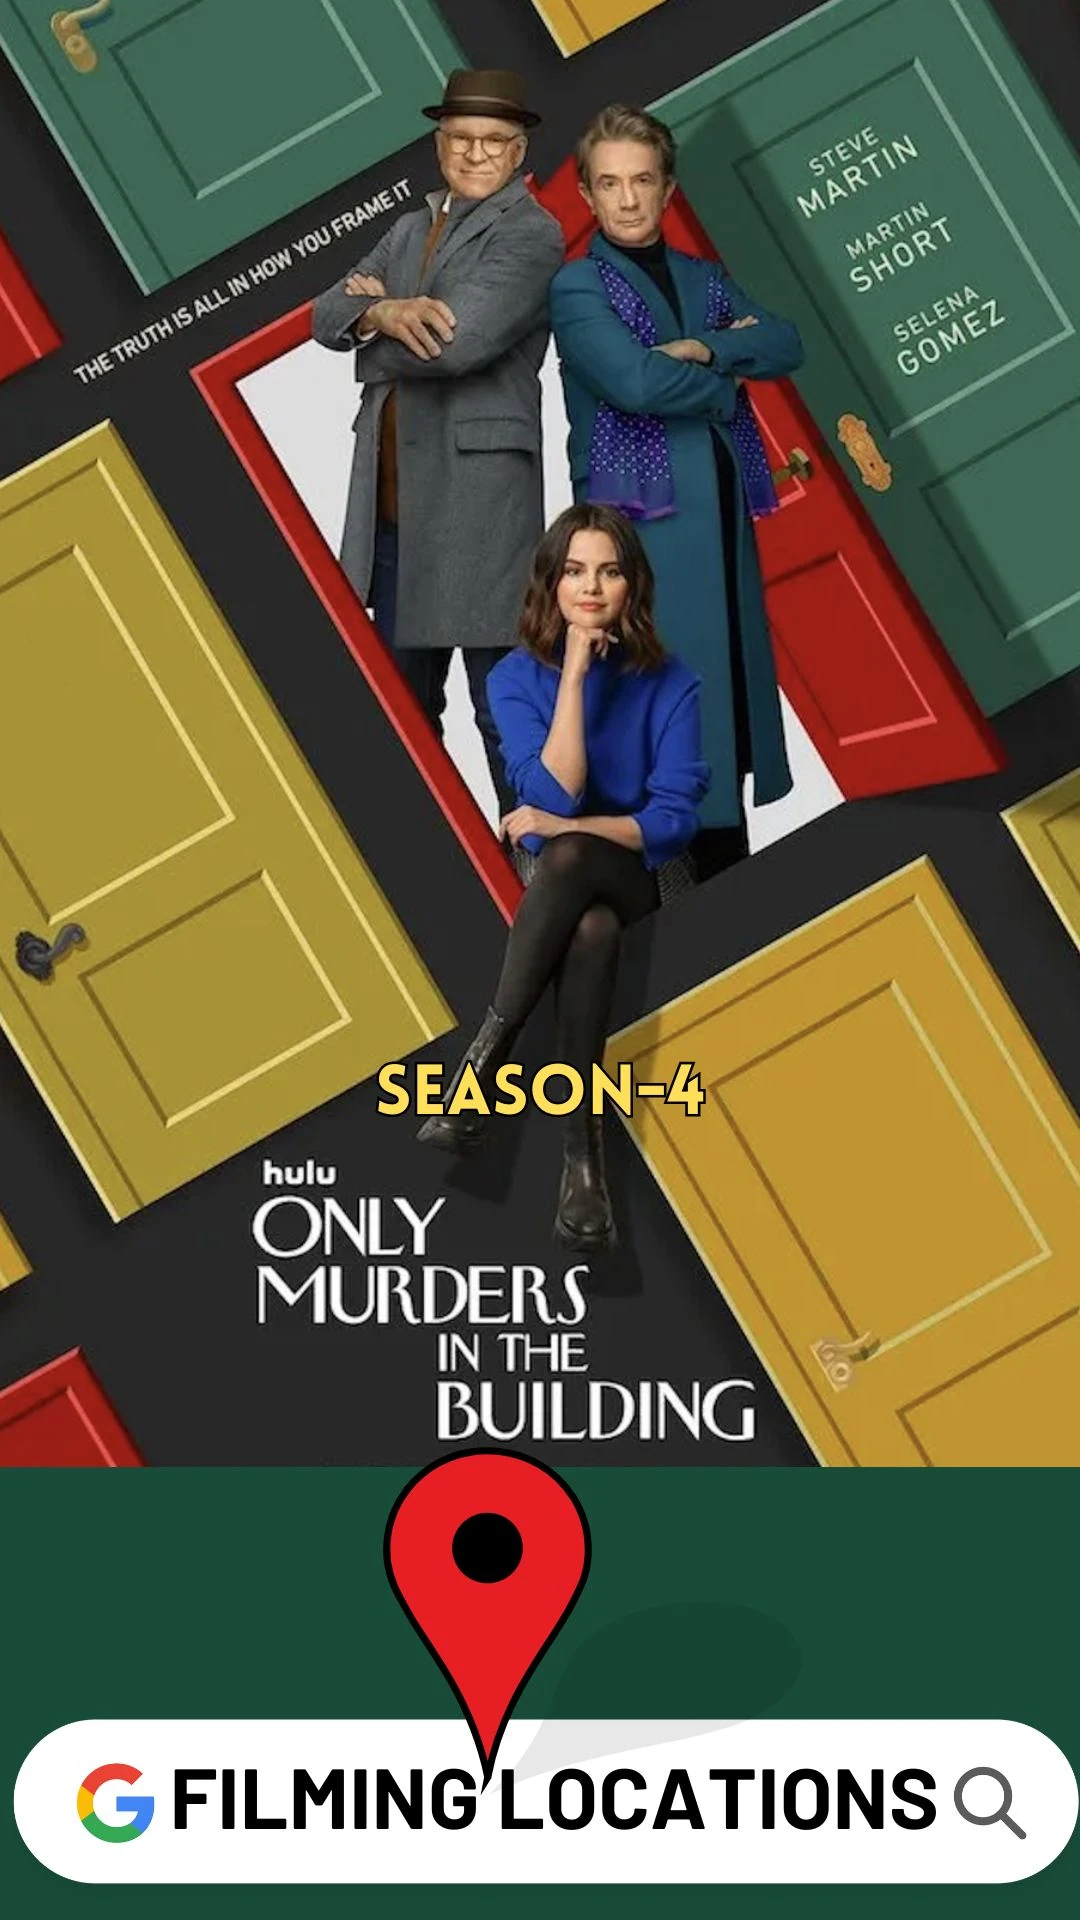 Only Murders in the Building Season 4 Filming Locations (2)